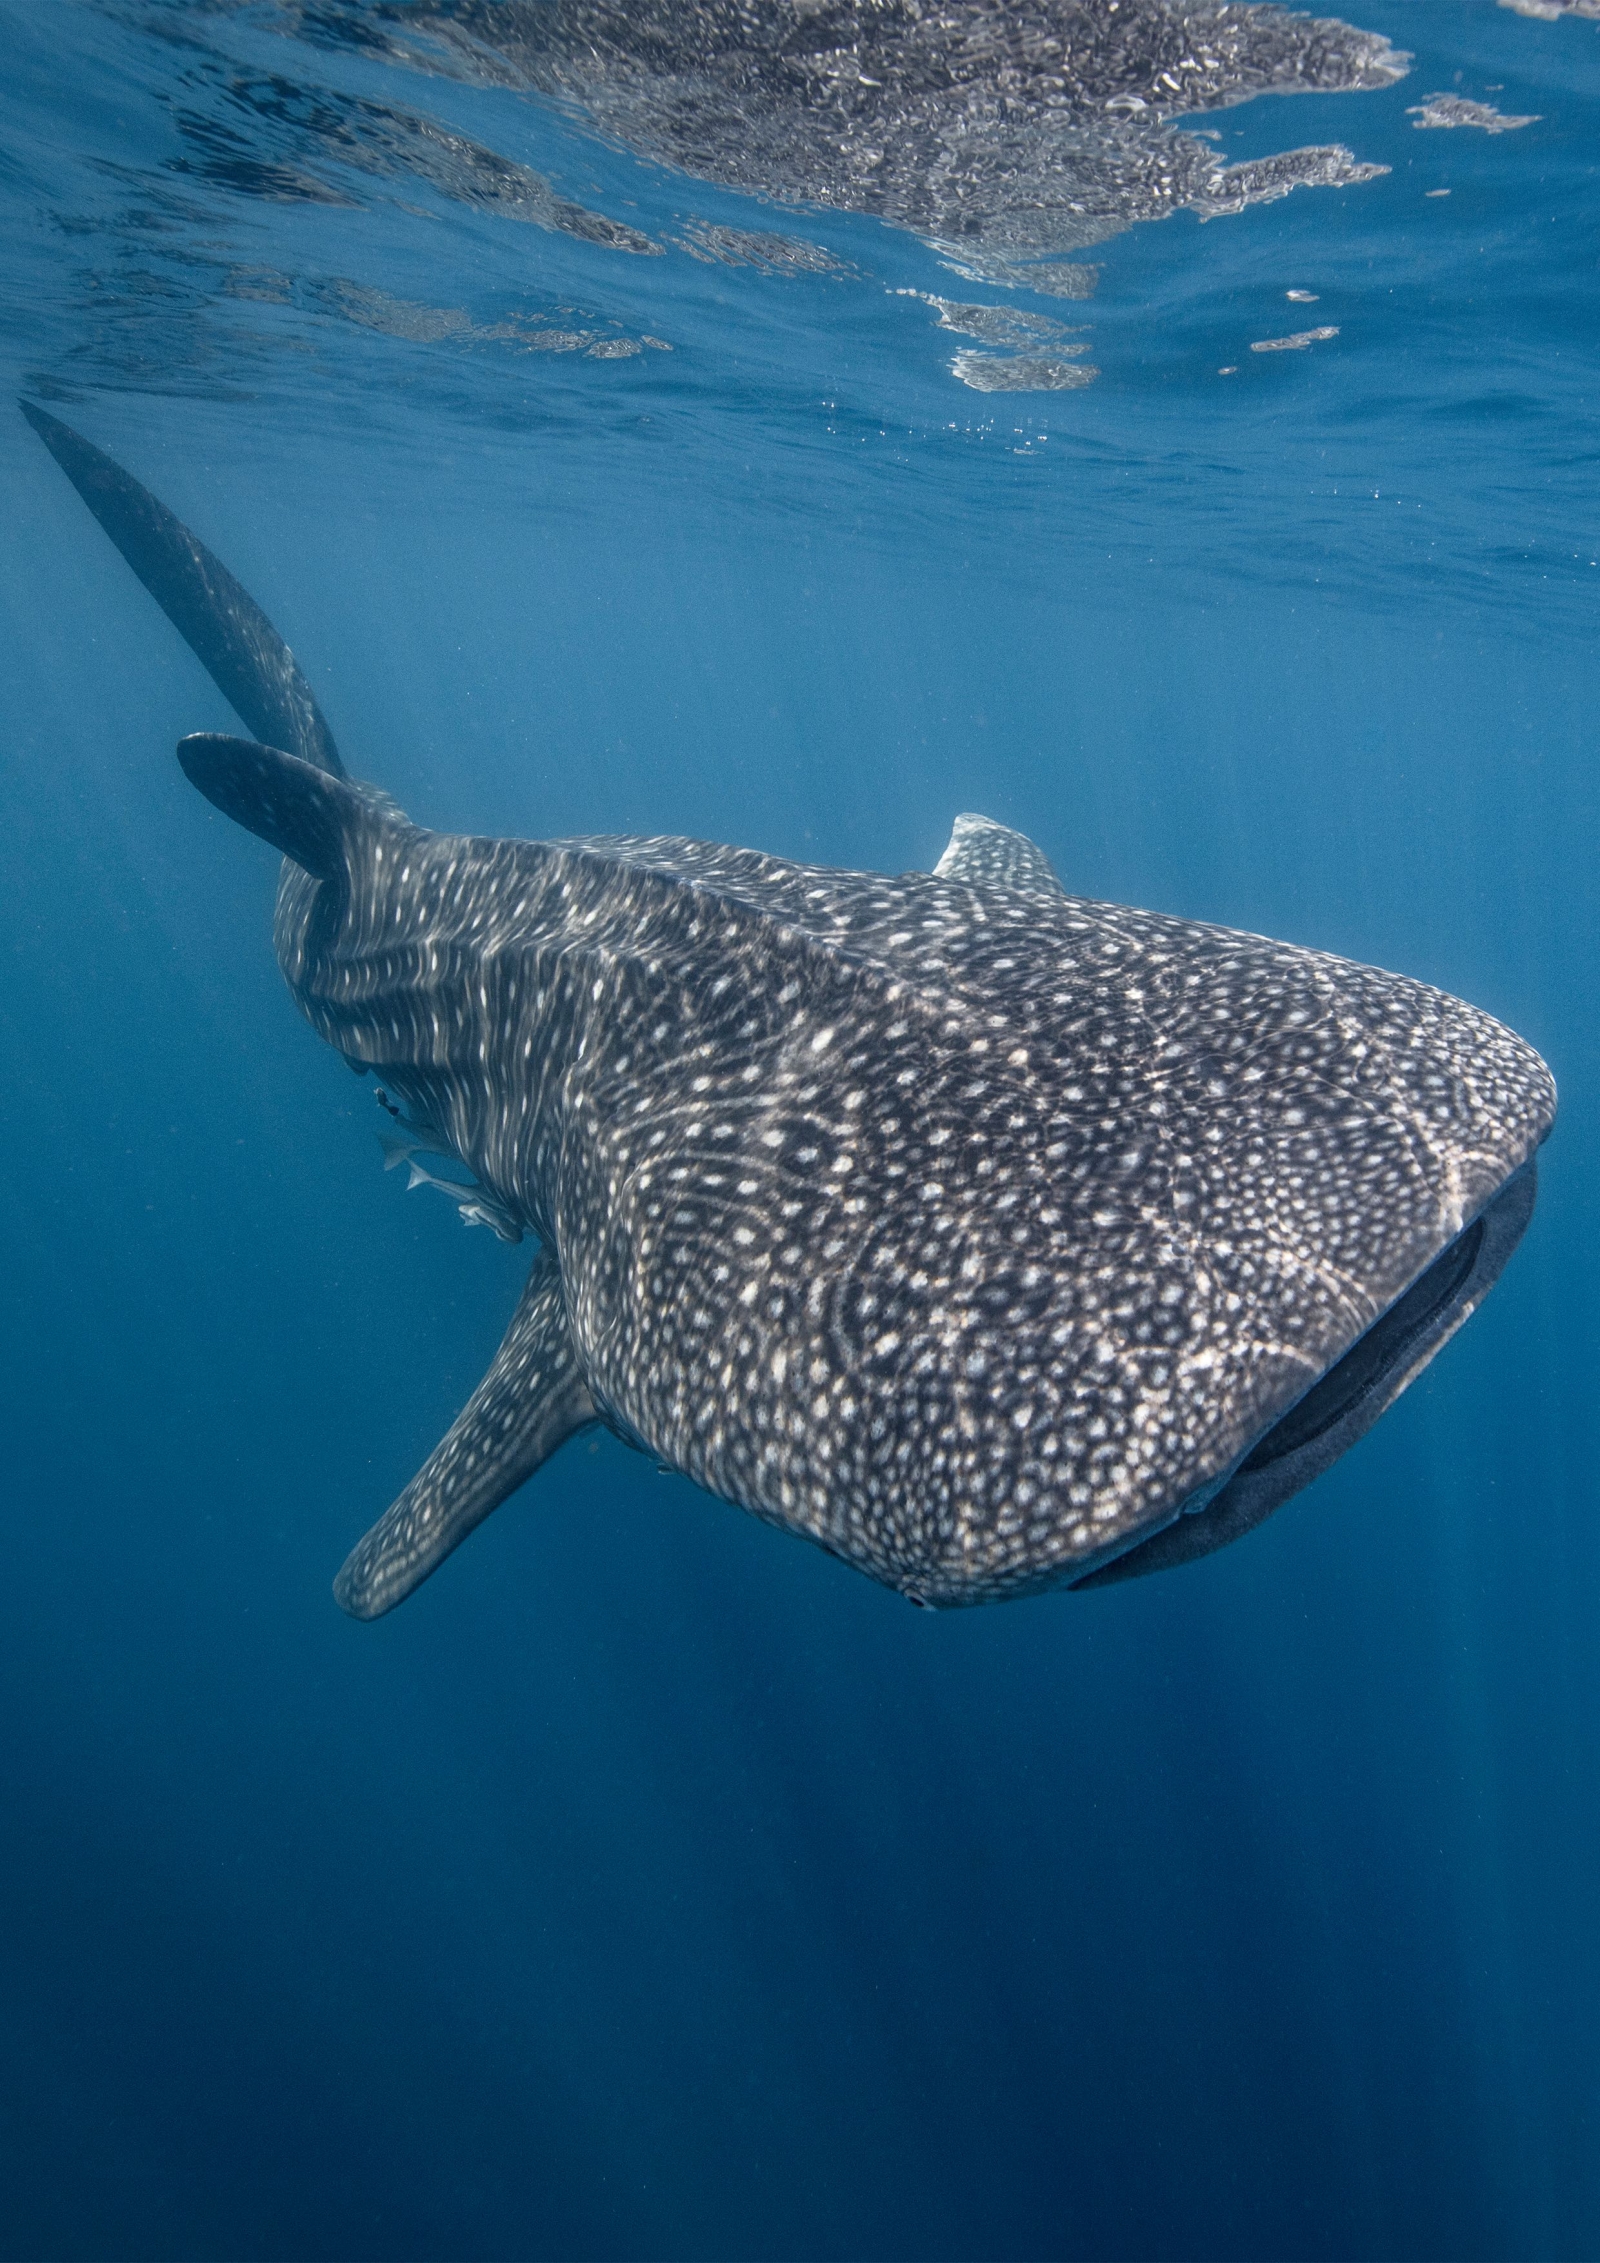 Whale shark Endangered species tracked by environmental DNA in seawater